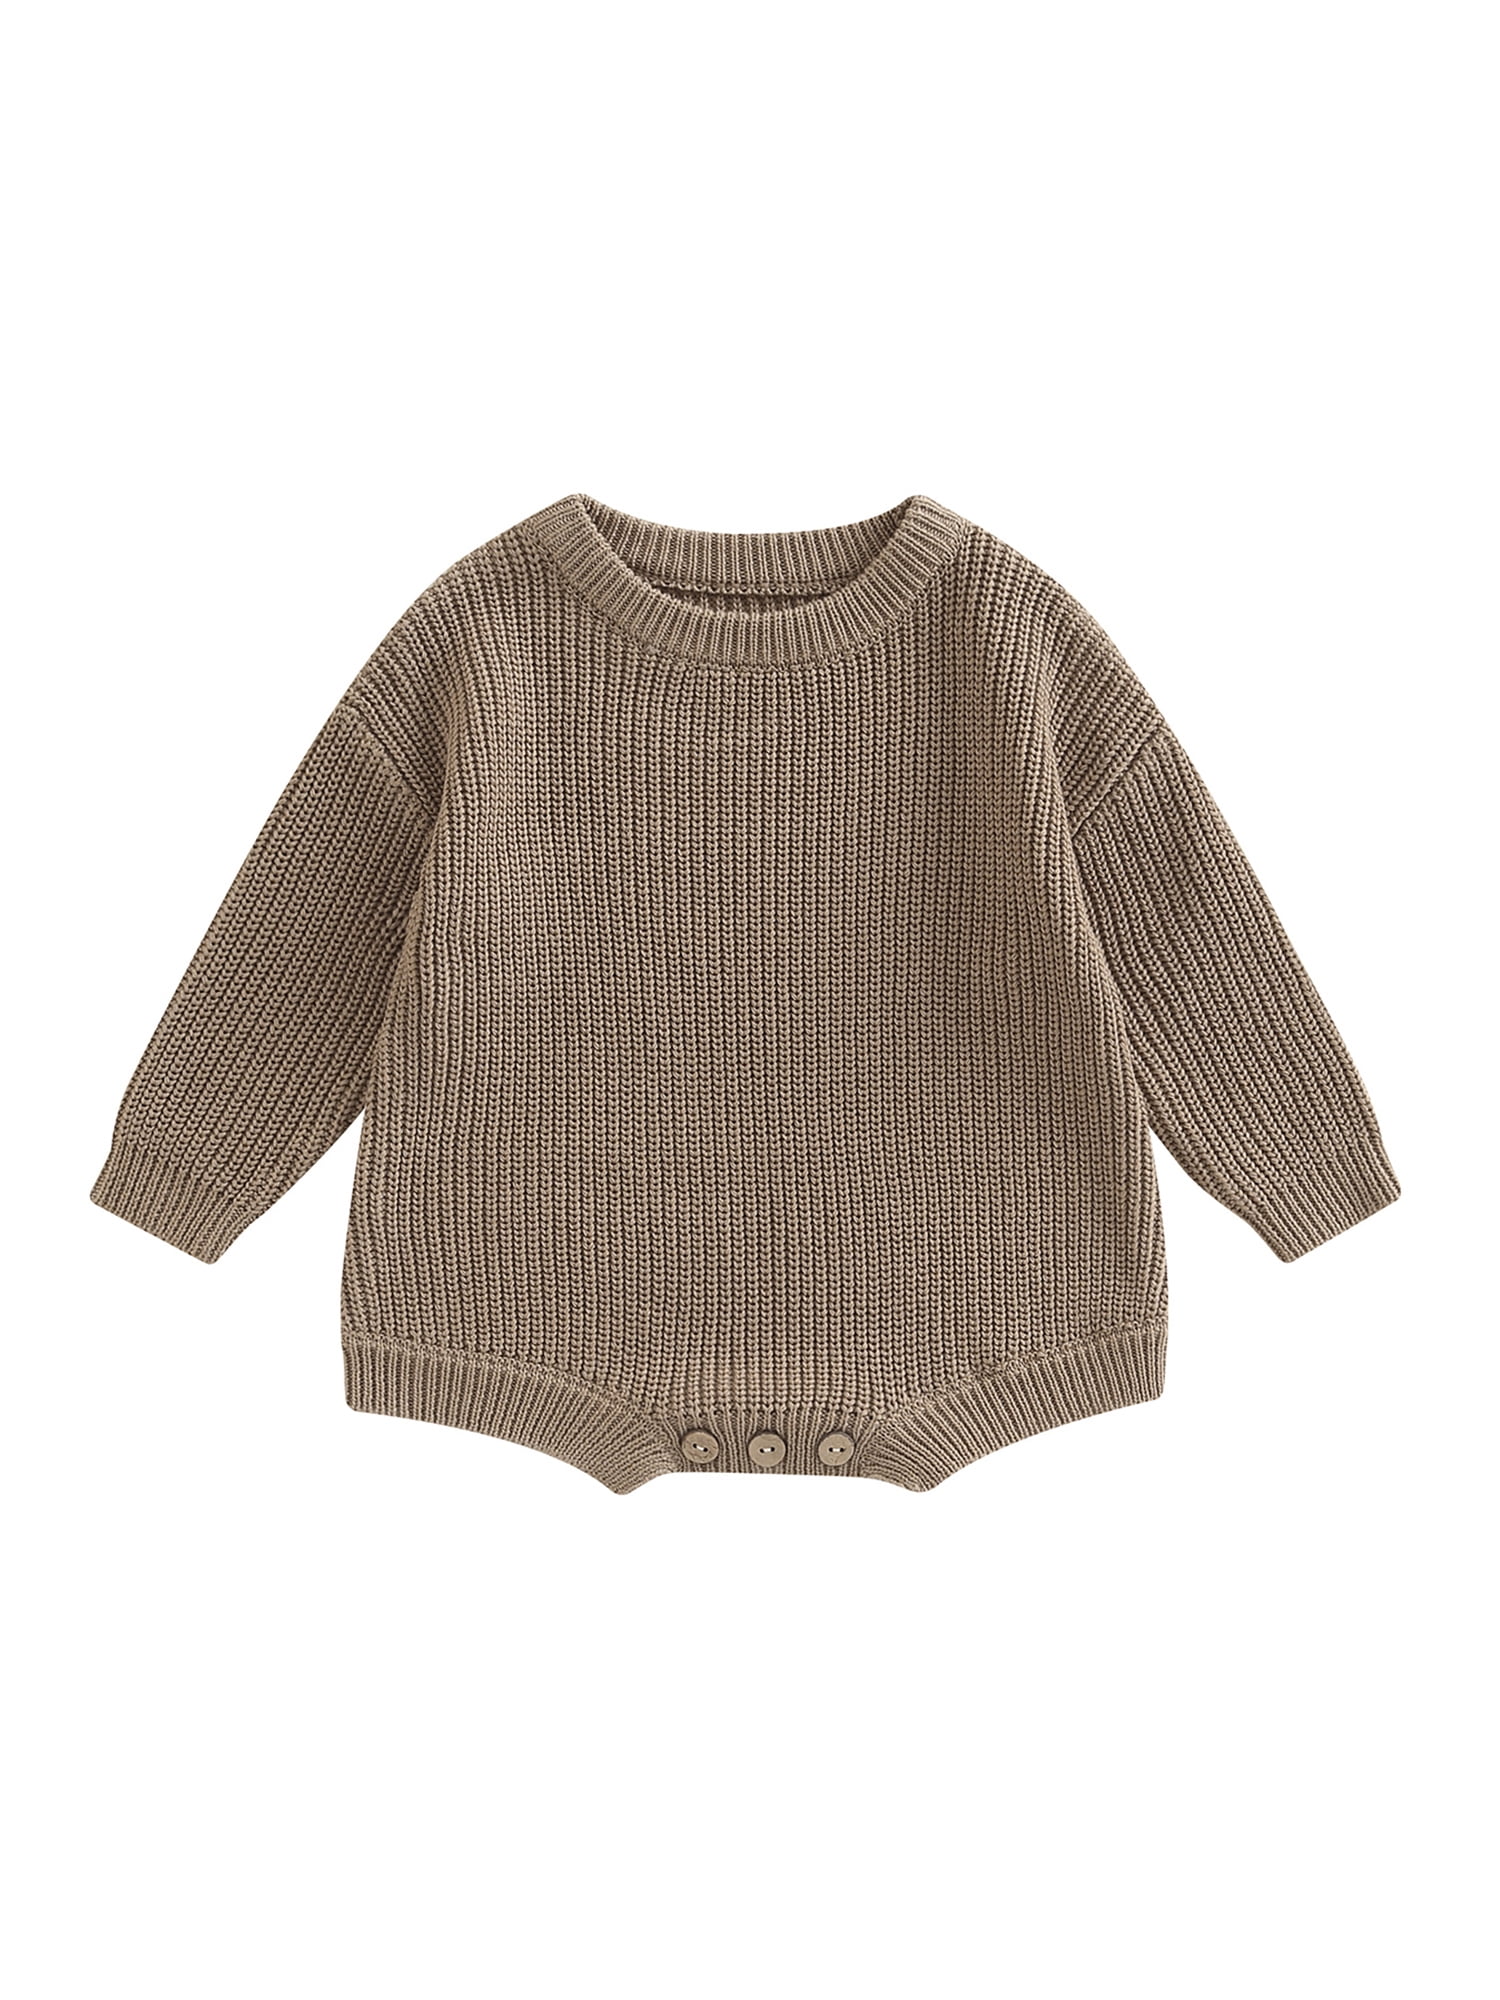 WakeUple Autumn Baby Sweater Rompers for Newborn Infant Boys Girls ...